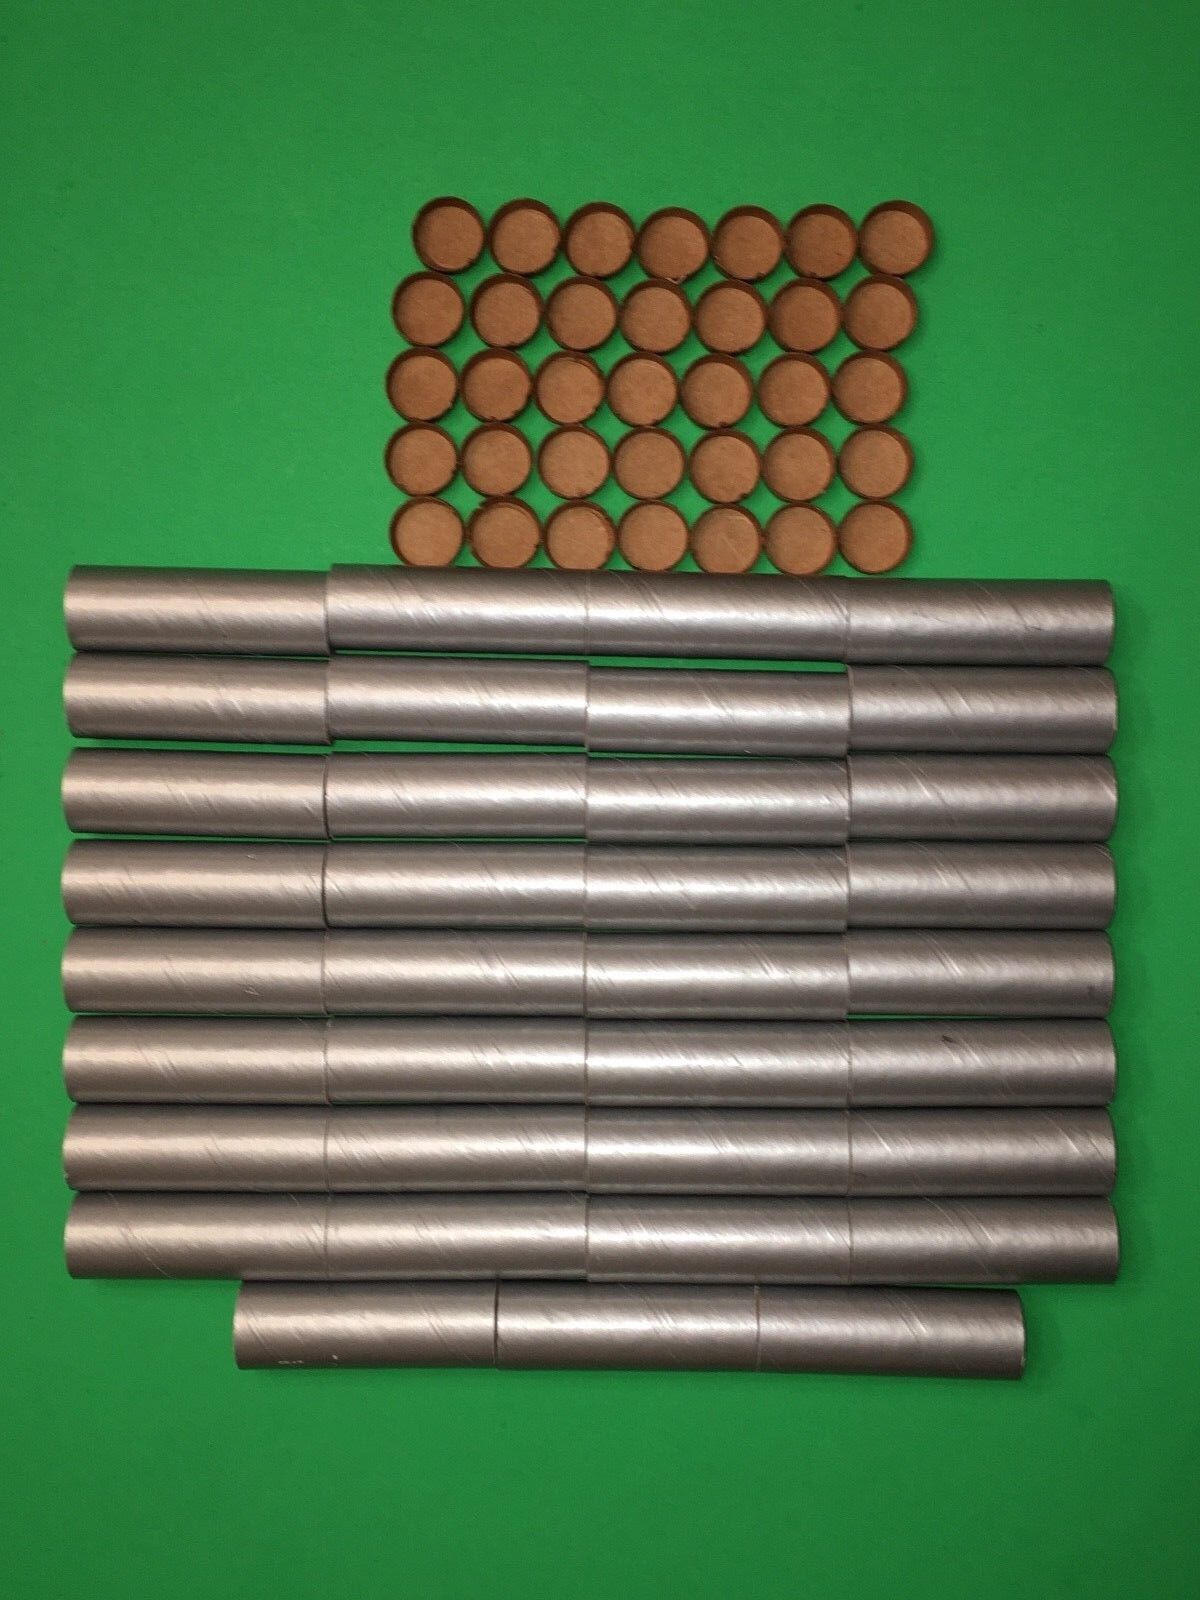 35 NEW Spiral 3 1/2"x1"x1/8" Fireworks Silver PYRO Cardboard Tubes W/End Plugs ! Unbranded Does Not Apply - фотография #2